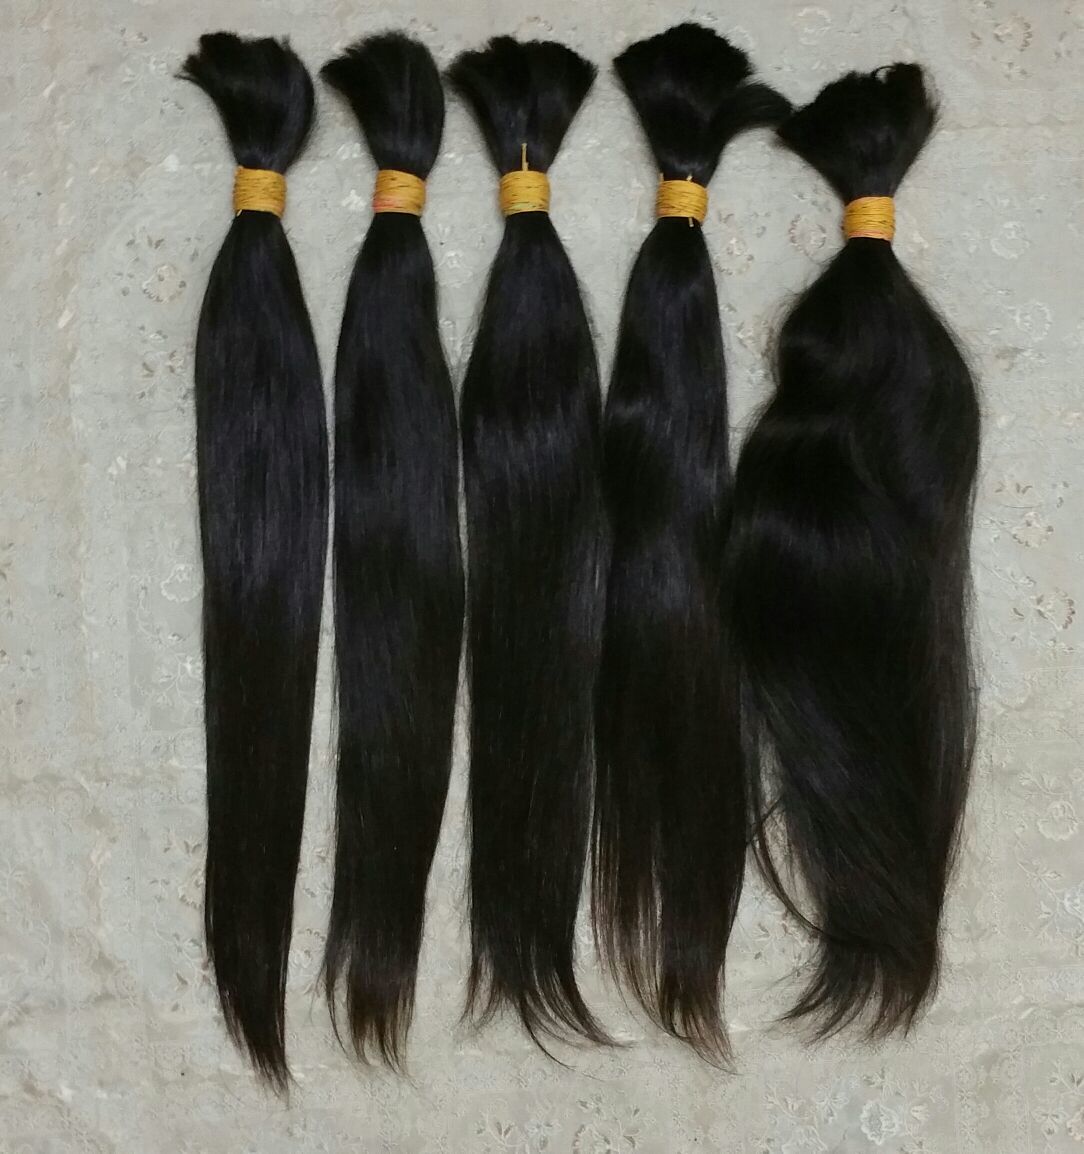 Indian Temple Straight Bulk best human hair extensions